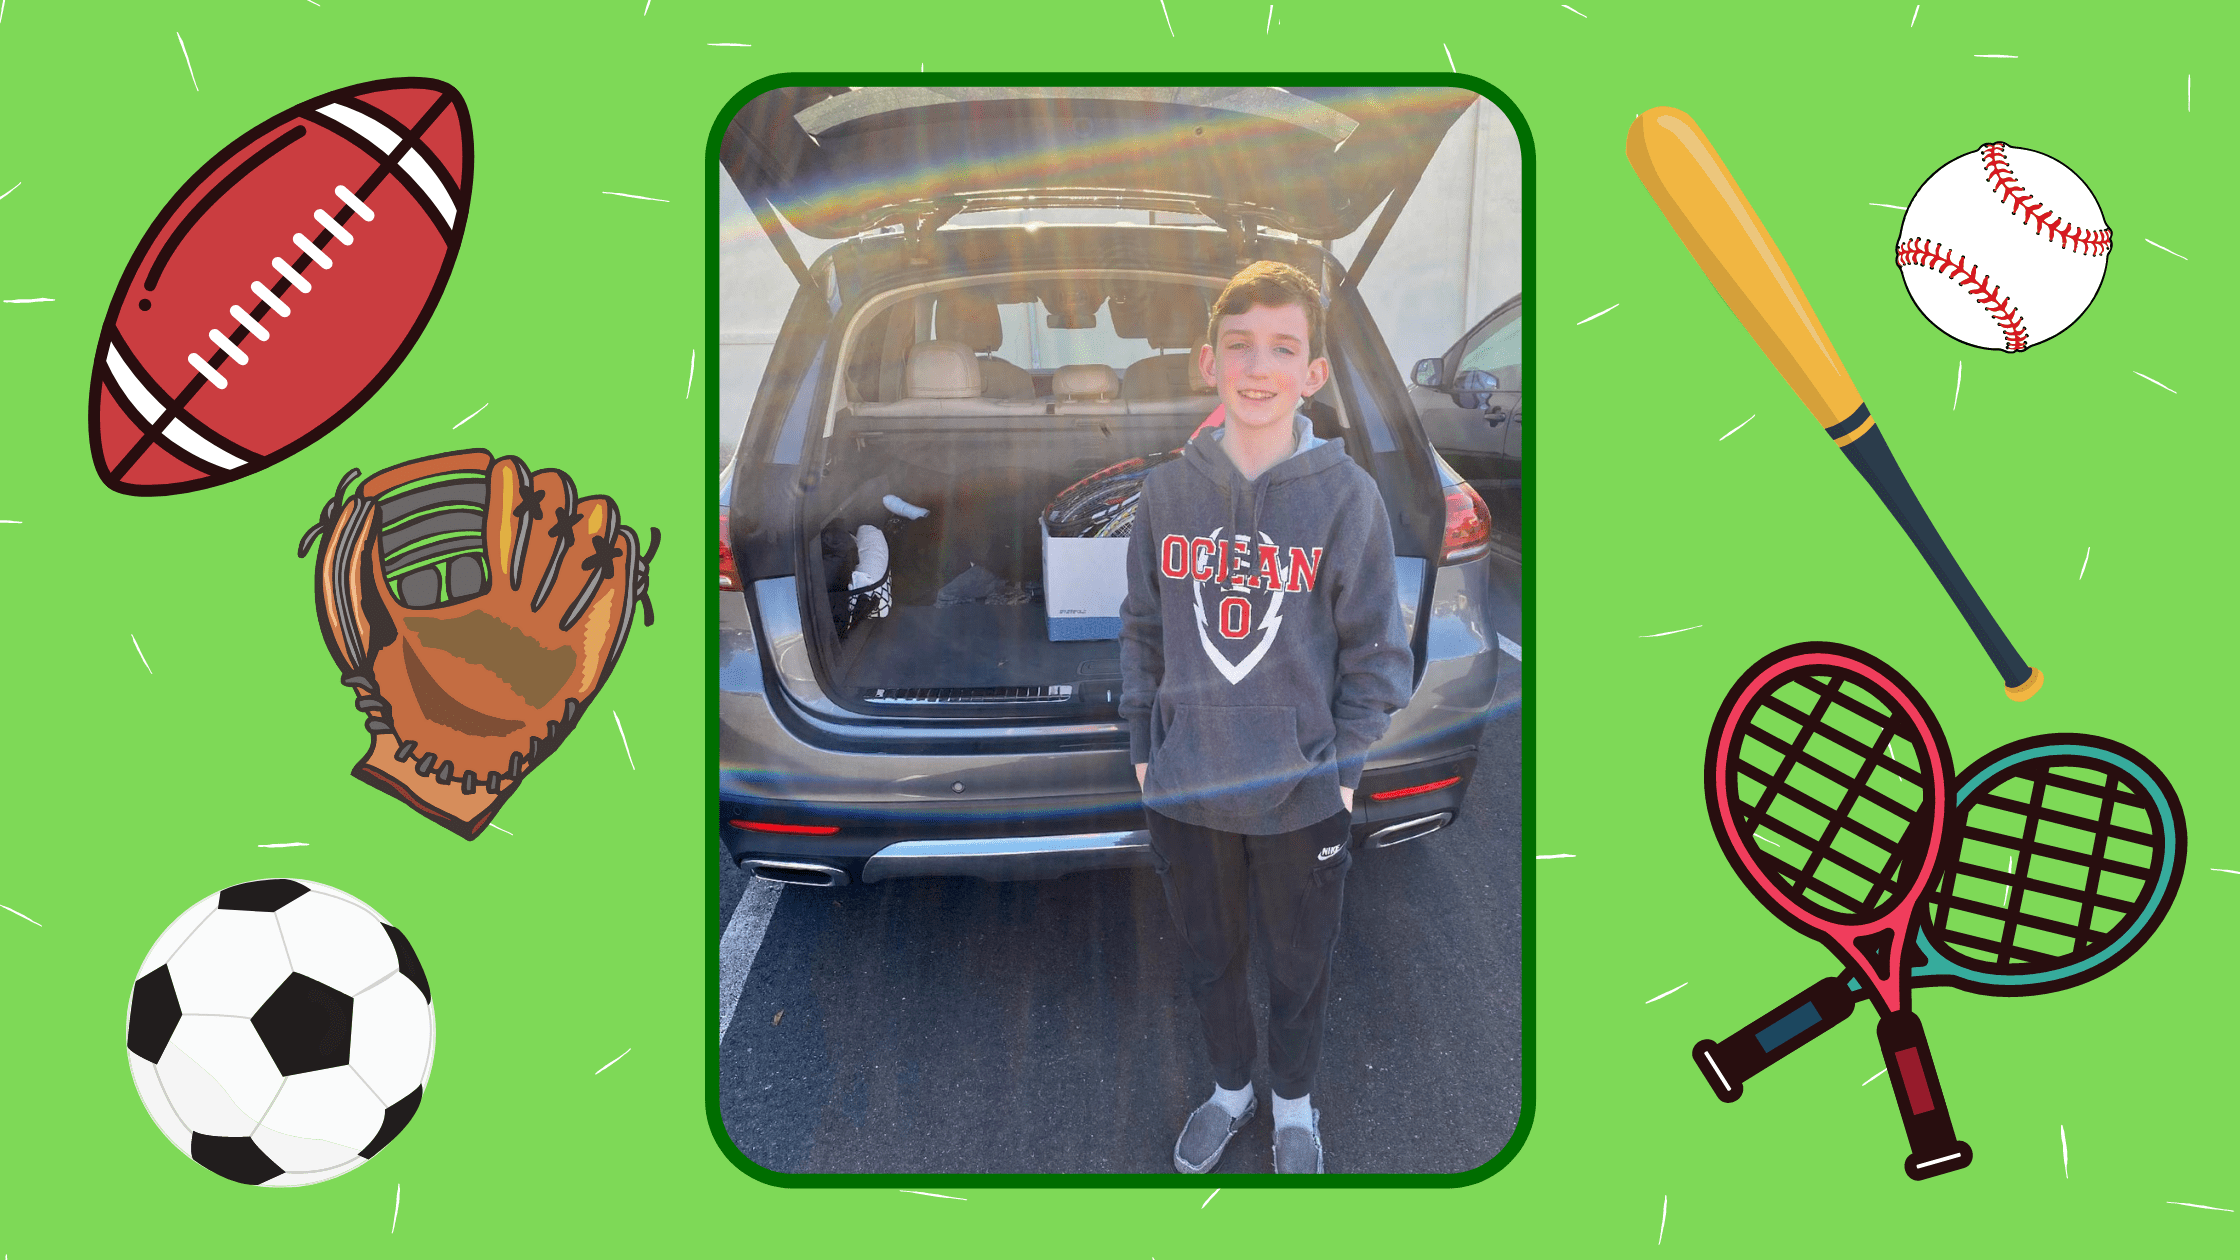 12-year-old Todd organizing his sporting goods drive